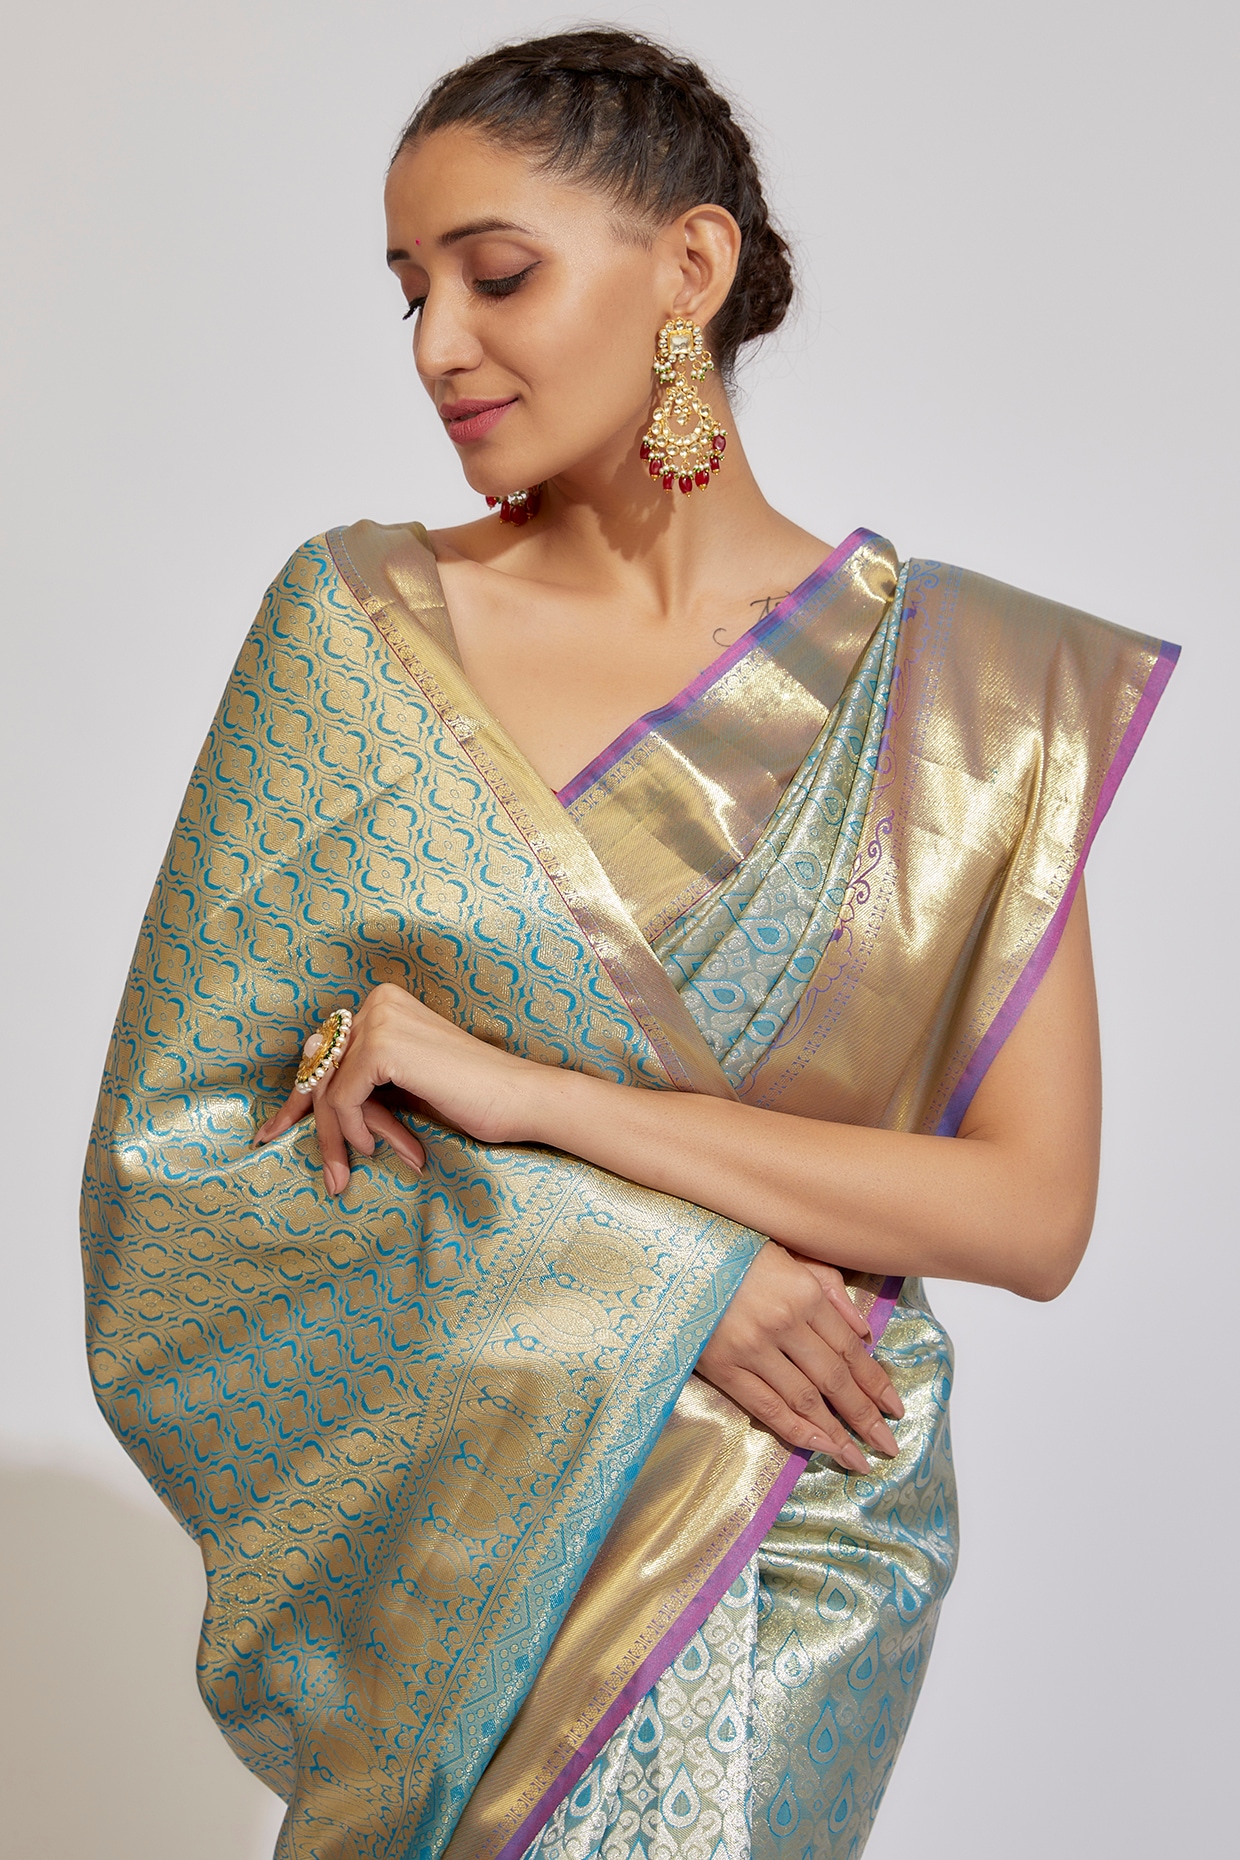 Look dashing in this feminine traditional saree made by fab funda. Pair  this ROYAL BLUE design with simple heels and a cute clutch when you're  going out to celebrate a loved one's